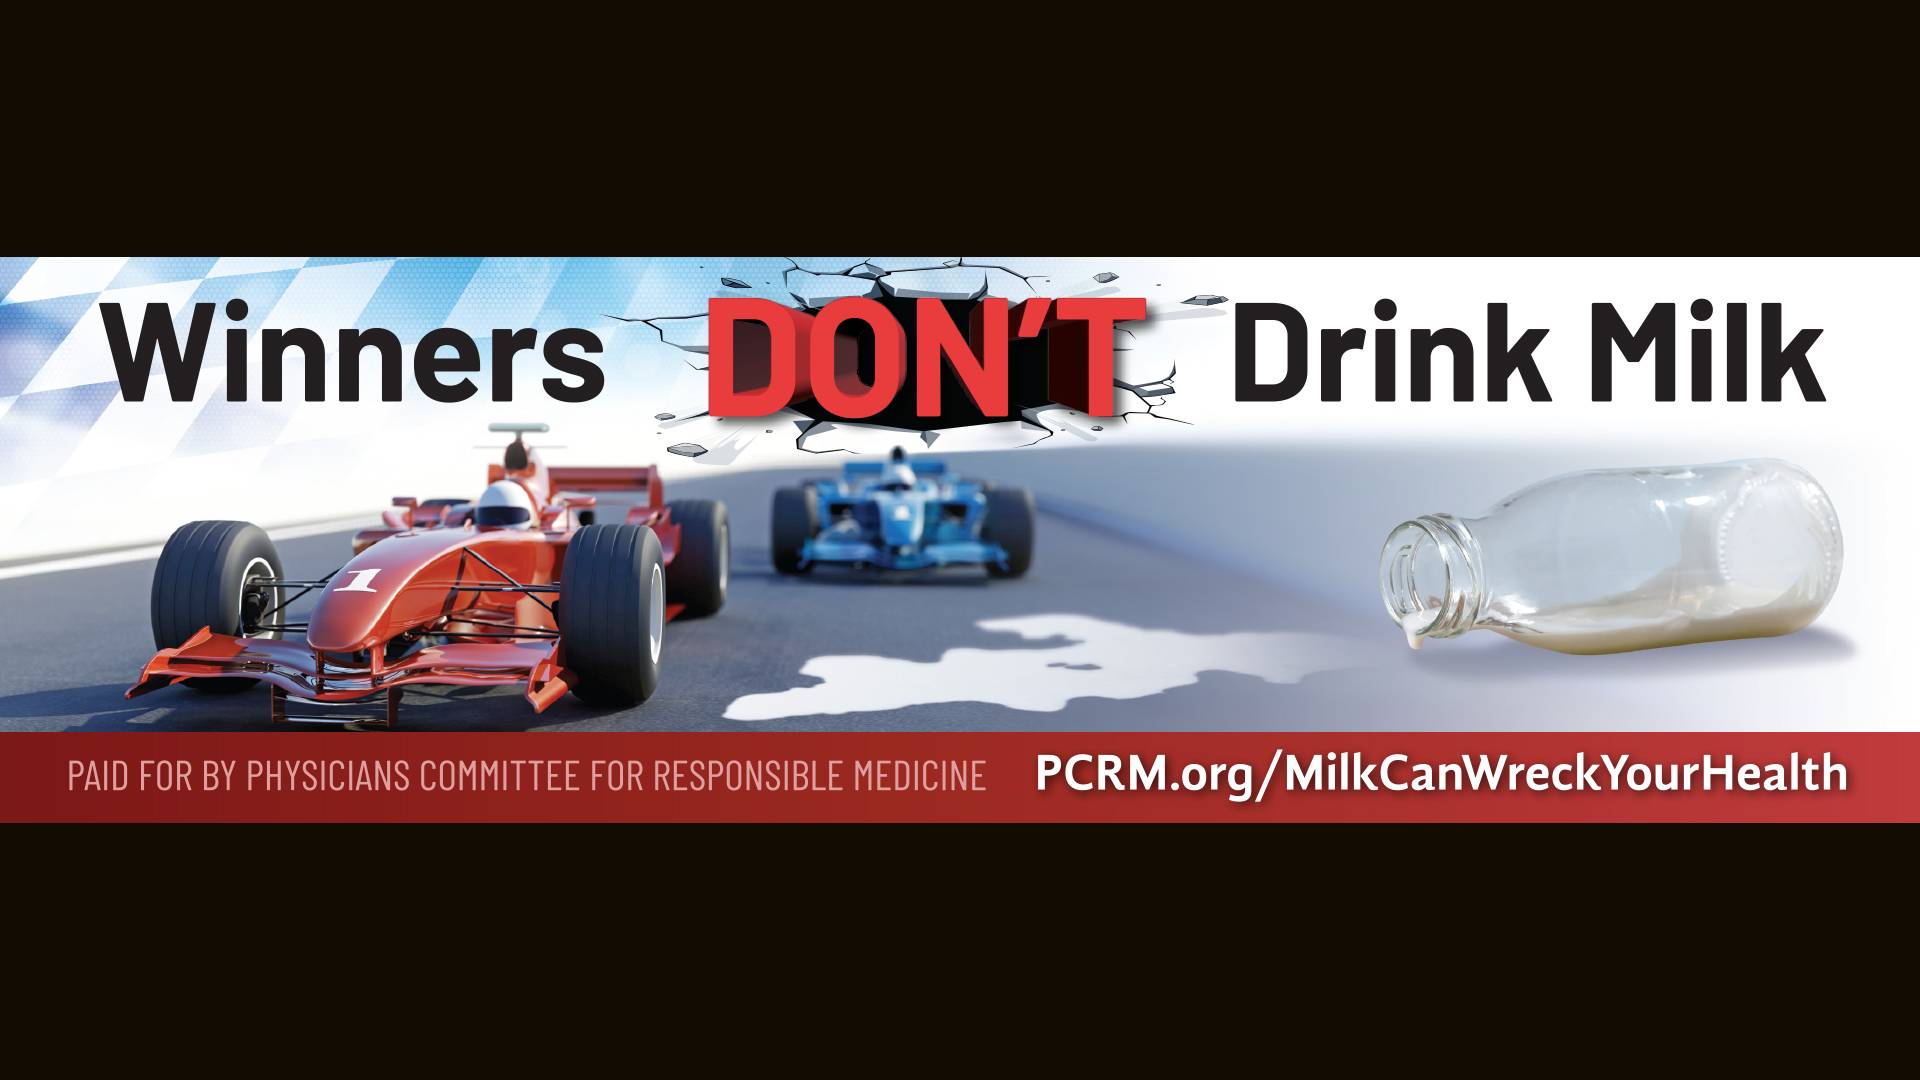 ‘Winners Don’t Drink Milk’ Proclaim Billboards Warning That Milk Can Wreck Your Health Ahead of Indy 500